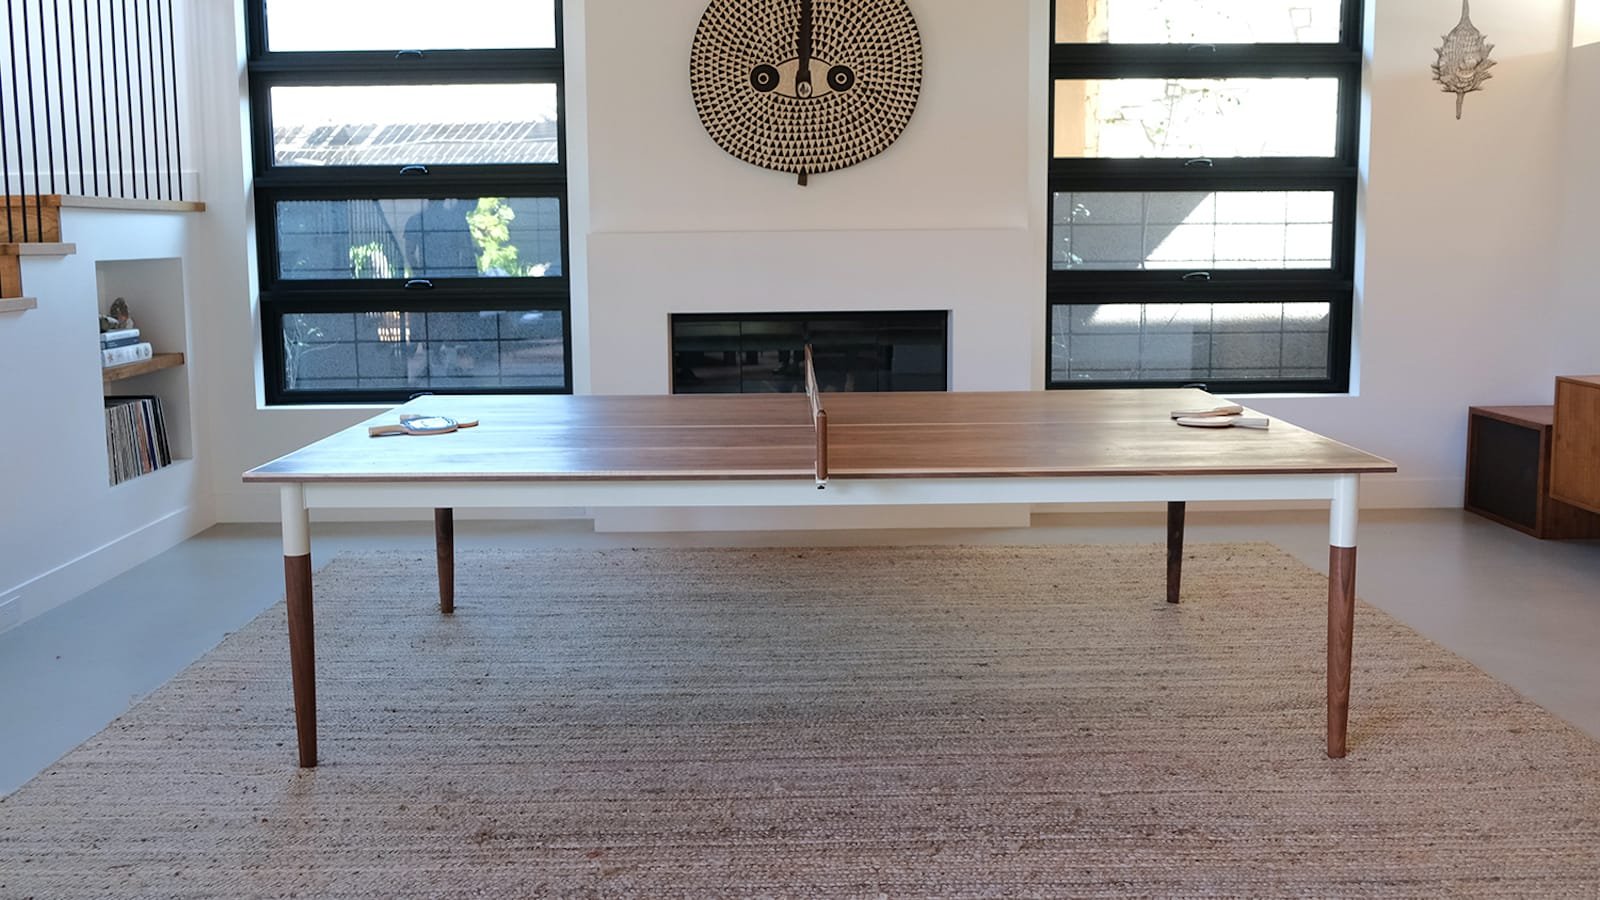 Sean Woolsey Studio Pong Springs ping pong table has a timeless MCM design